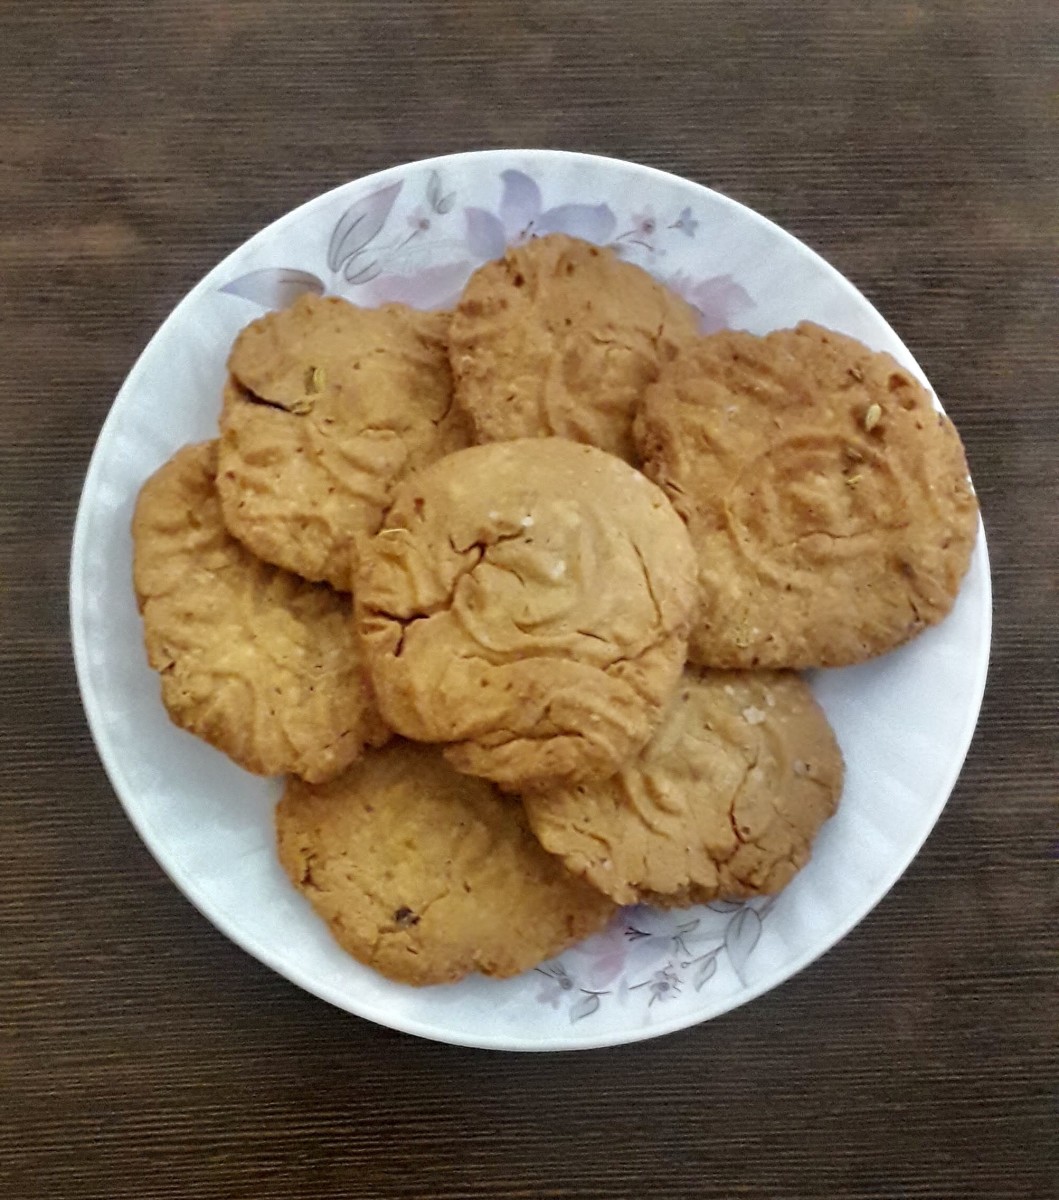 Thekua is a traditional Indian festival sweet. It is known as thekua in Bihar, and khajur in Uttar Pradesh.